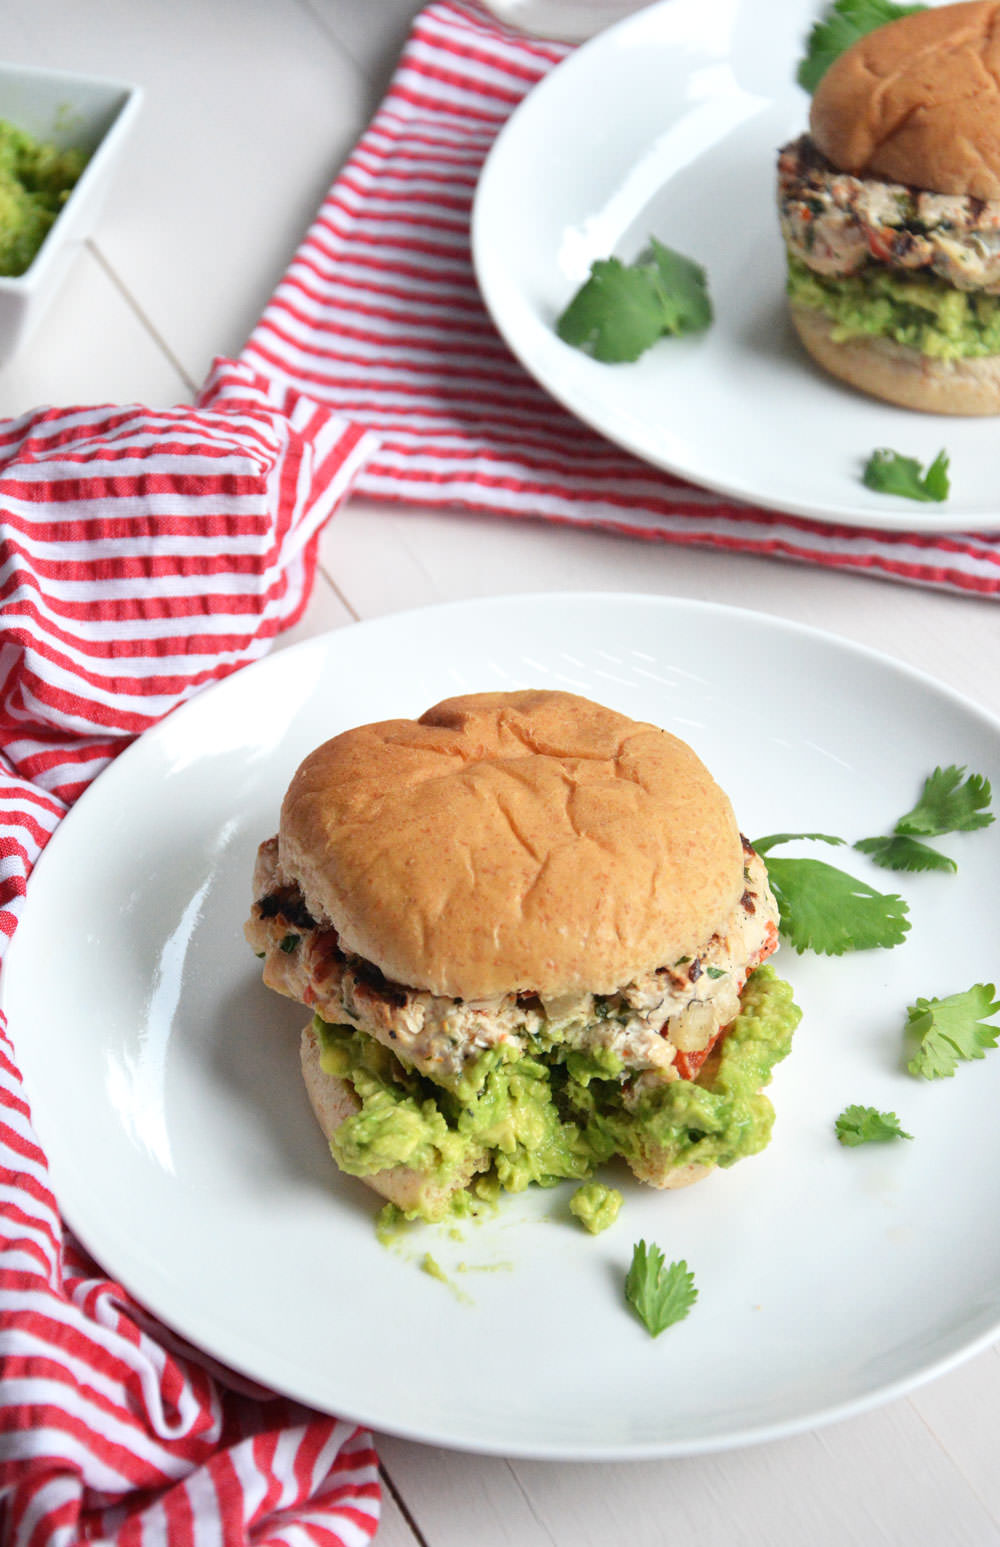 Avocado and Chile Lime Chicken Burges - Lean chicken burgers with red peppers and lime! #healthy #paleo #glutenfree #burgers